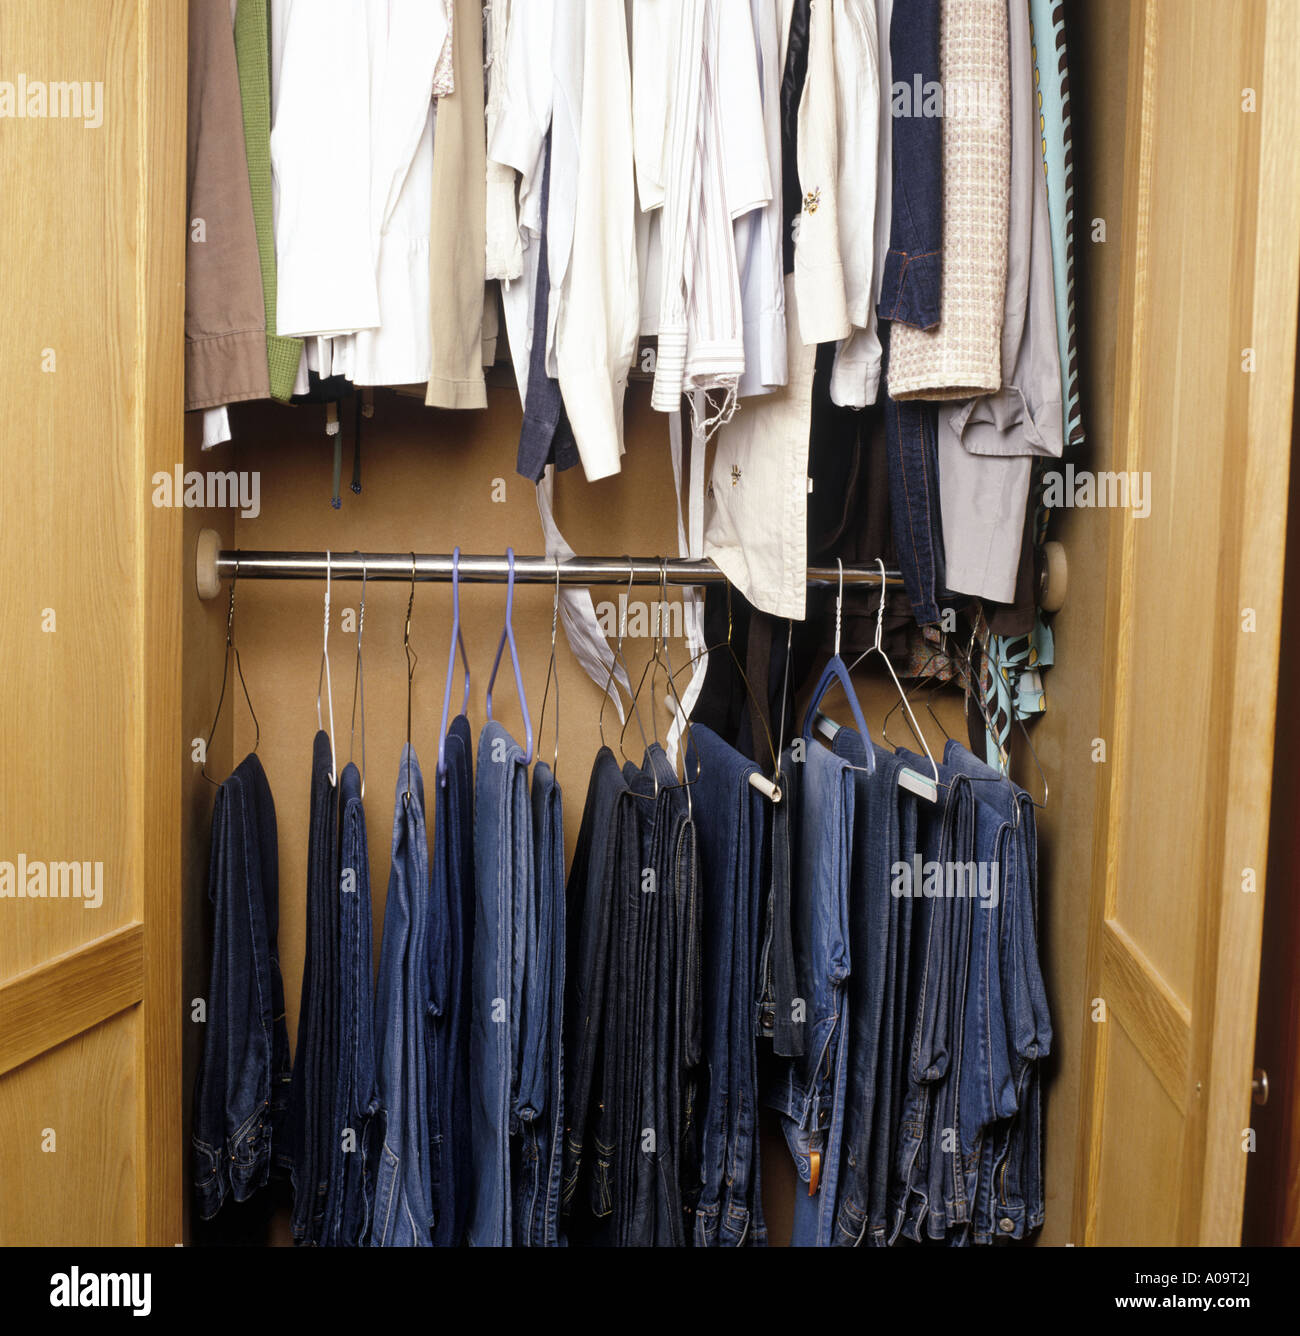 a selection of jeans and shirts hanging up in a wardrobe Stock Photo